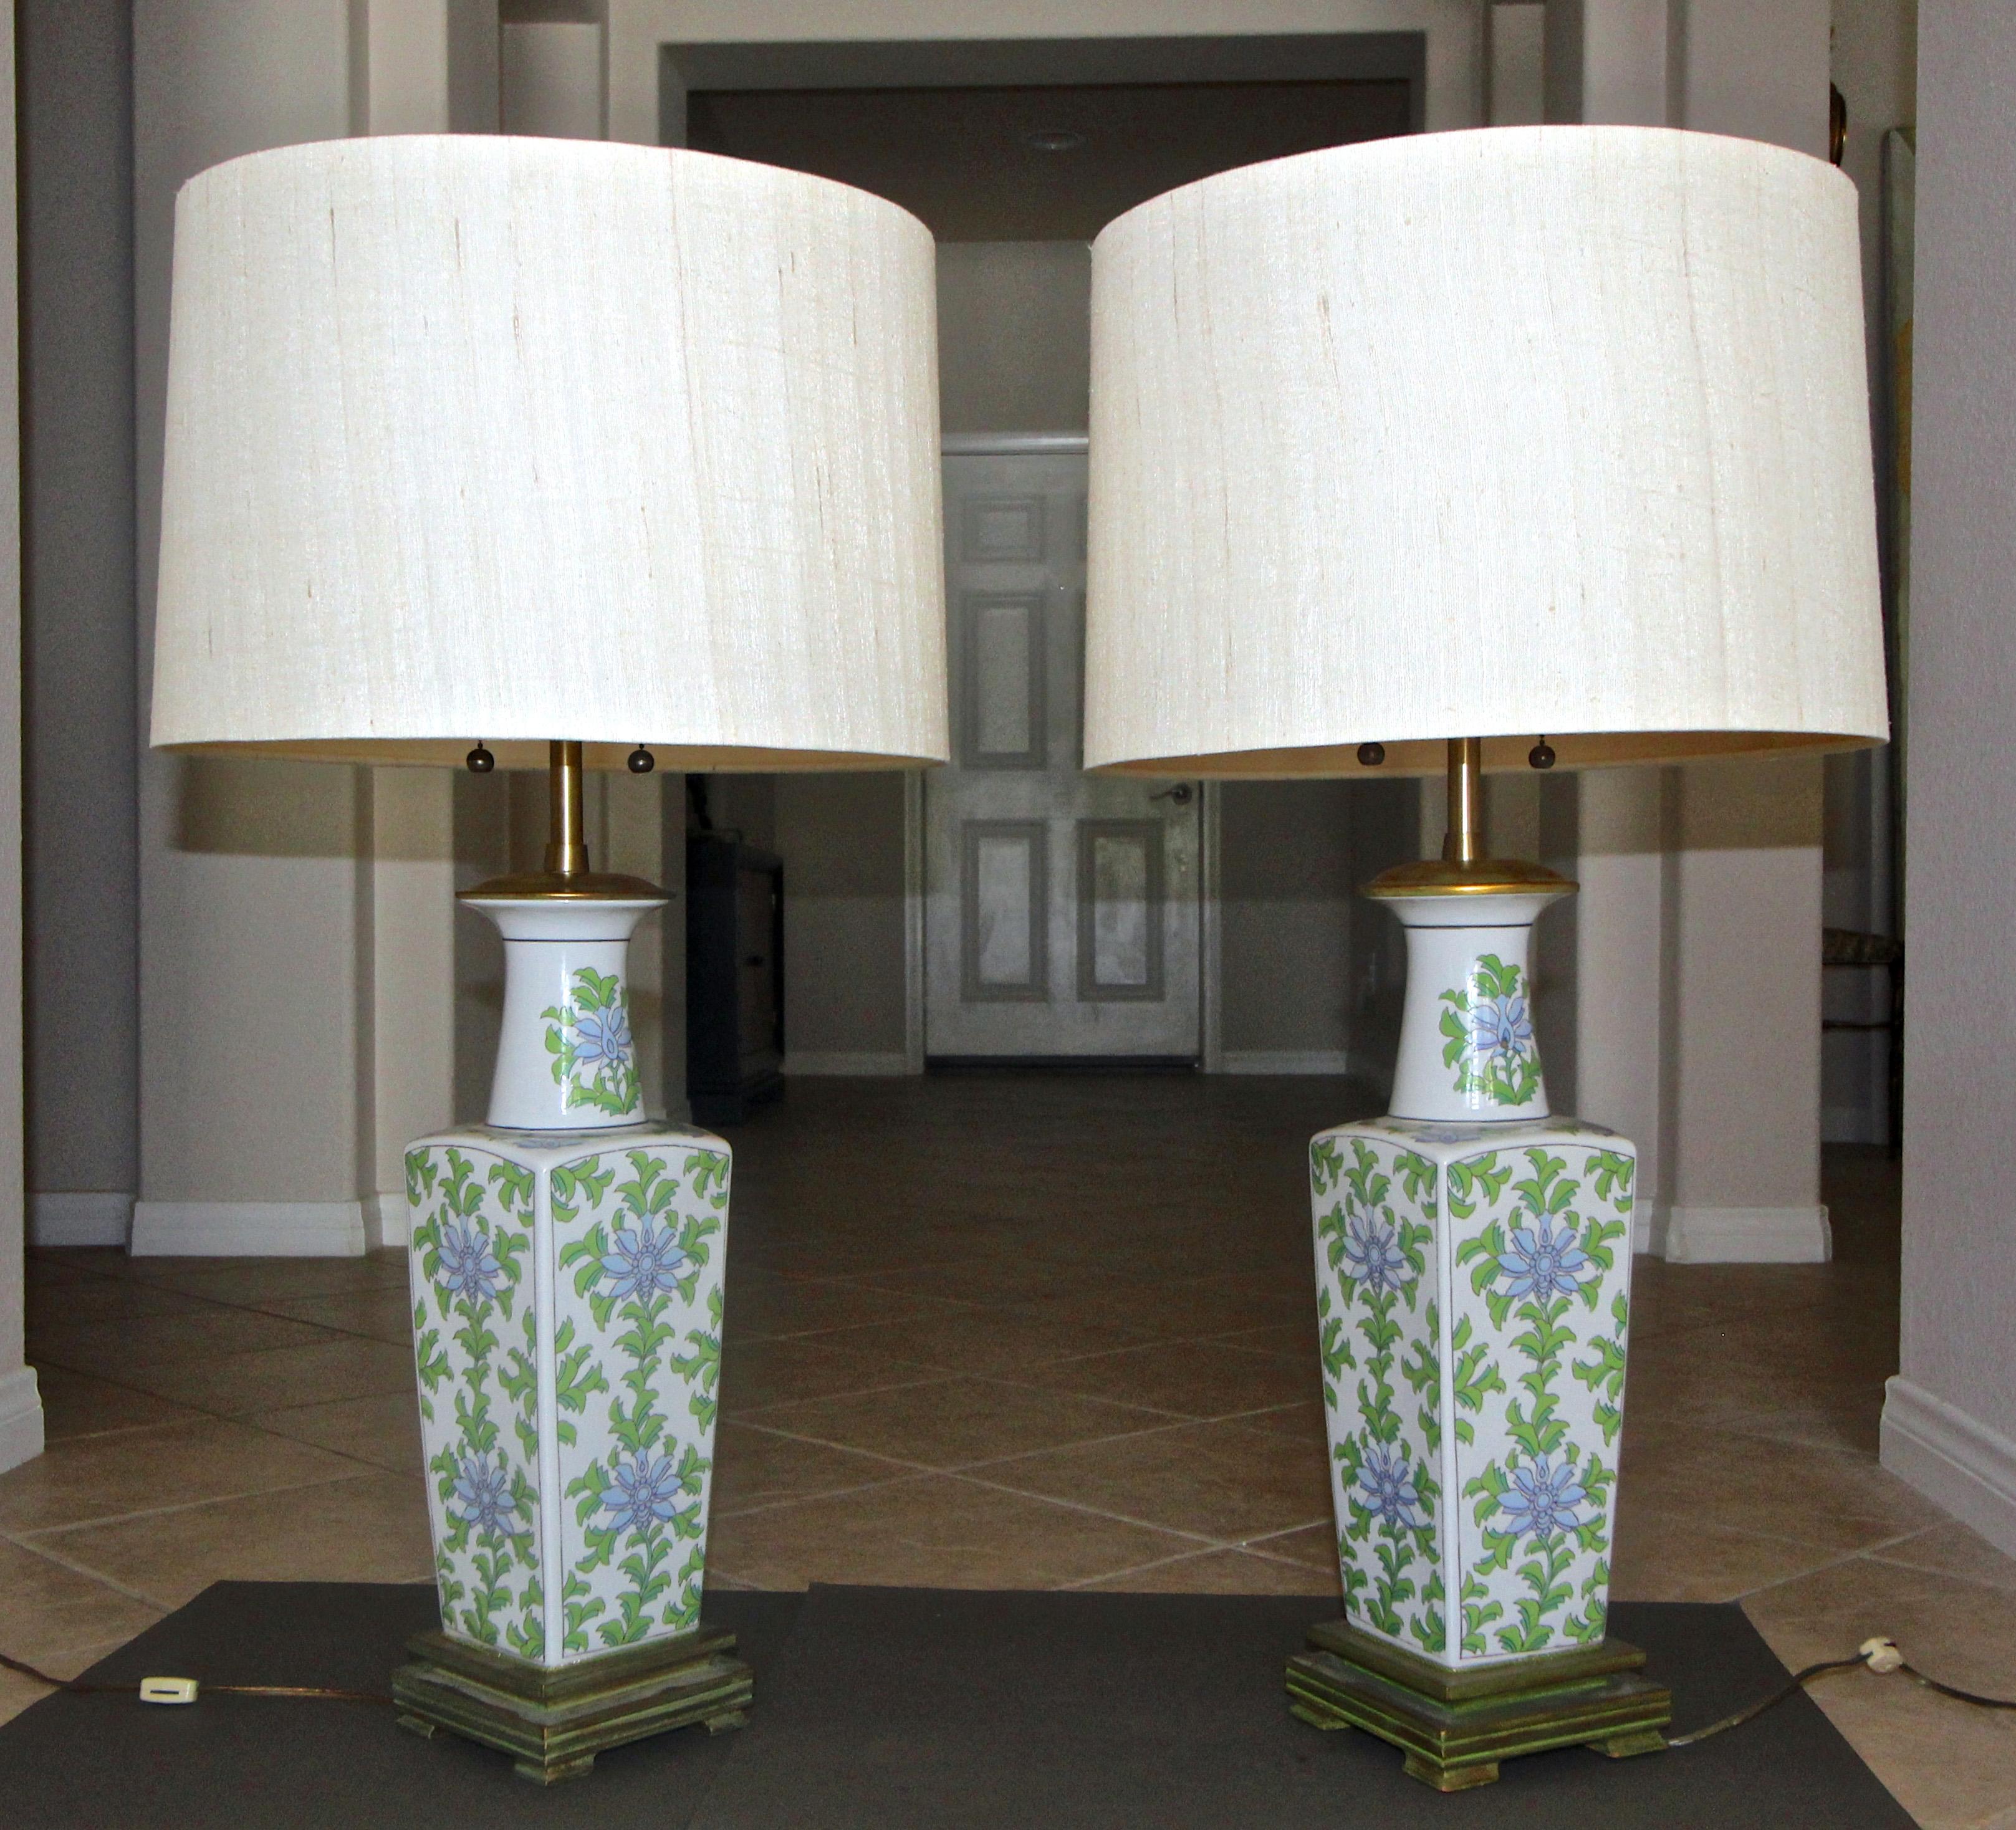 Pair of Asian floral green and lavender motif porcelain table lamps by Marbro. The lamps rest on custom patinated green wood bases. Original solid brass double cluster sockets and fittings. Retains original Marbro label. Shades not included and are